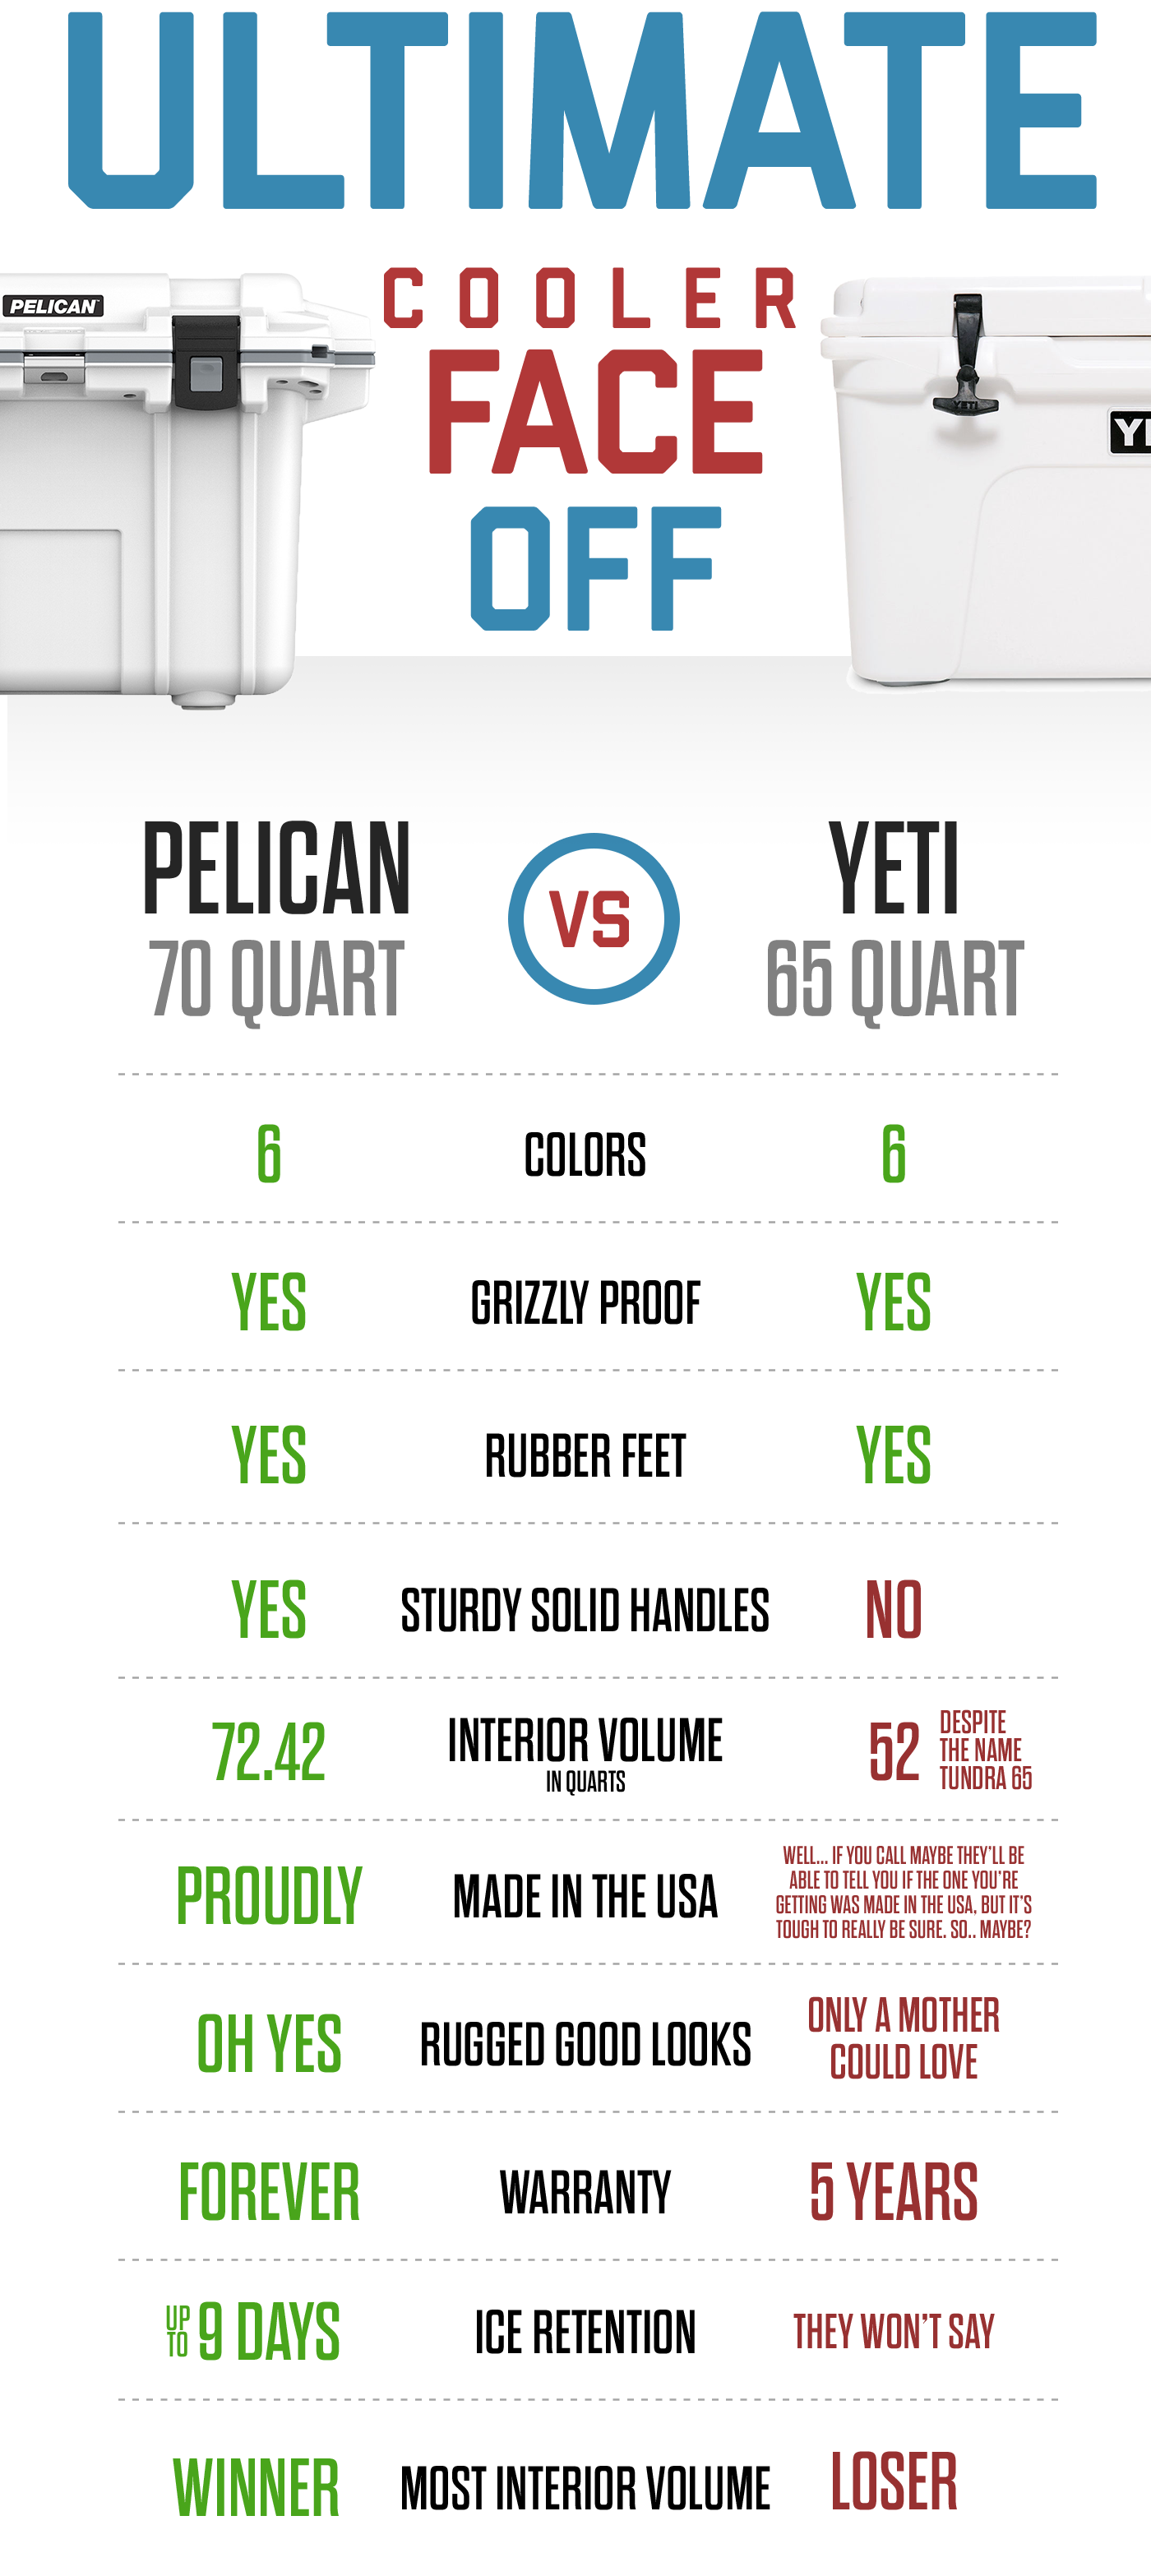 Pelican Coolers vs. Yeti. Which is better?